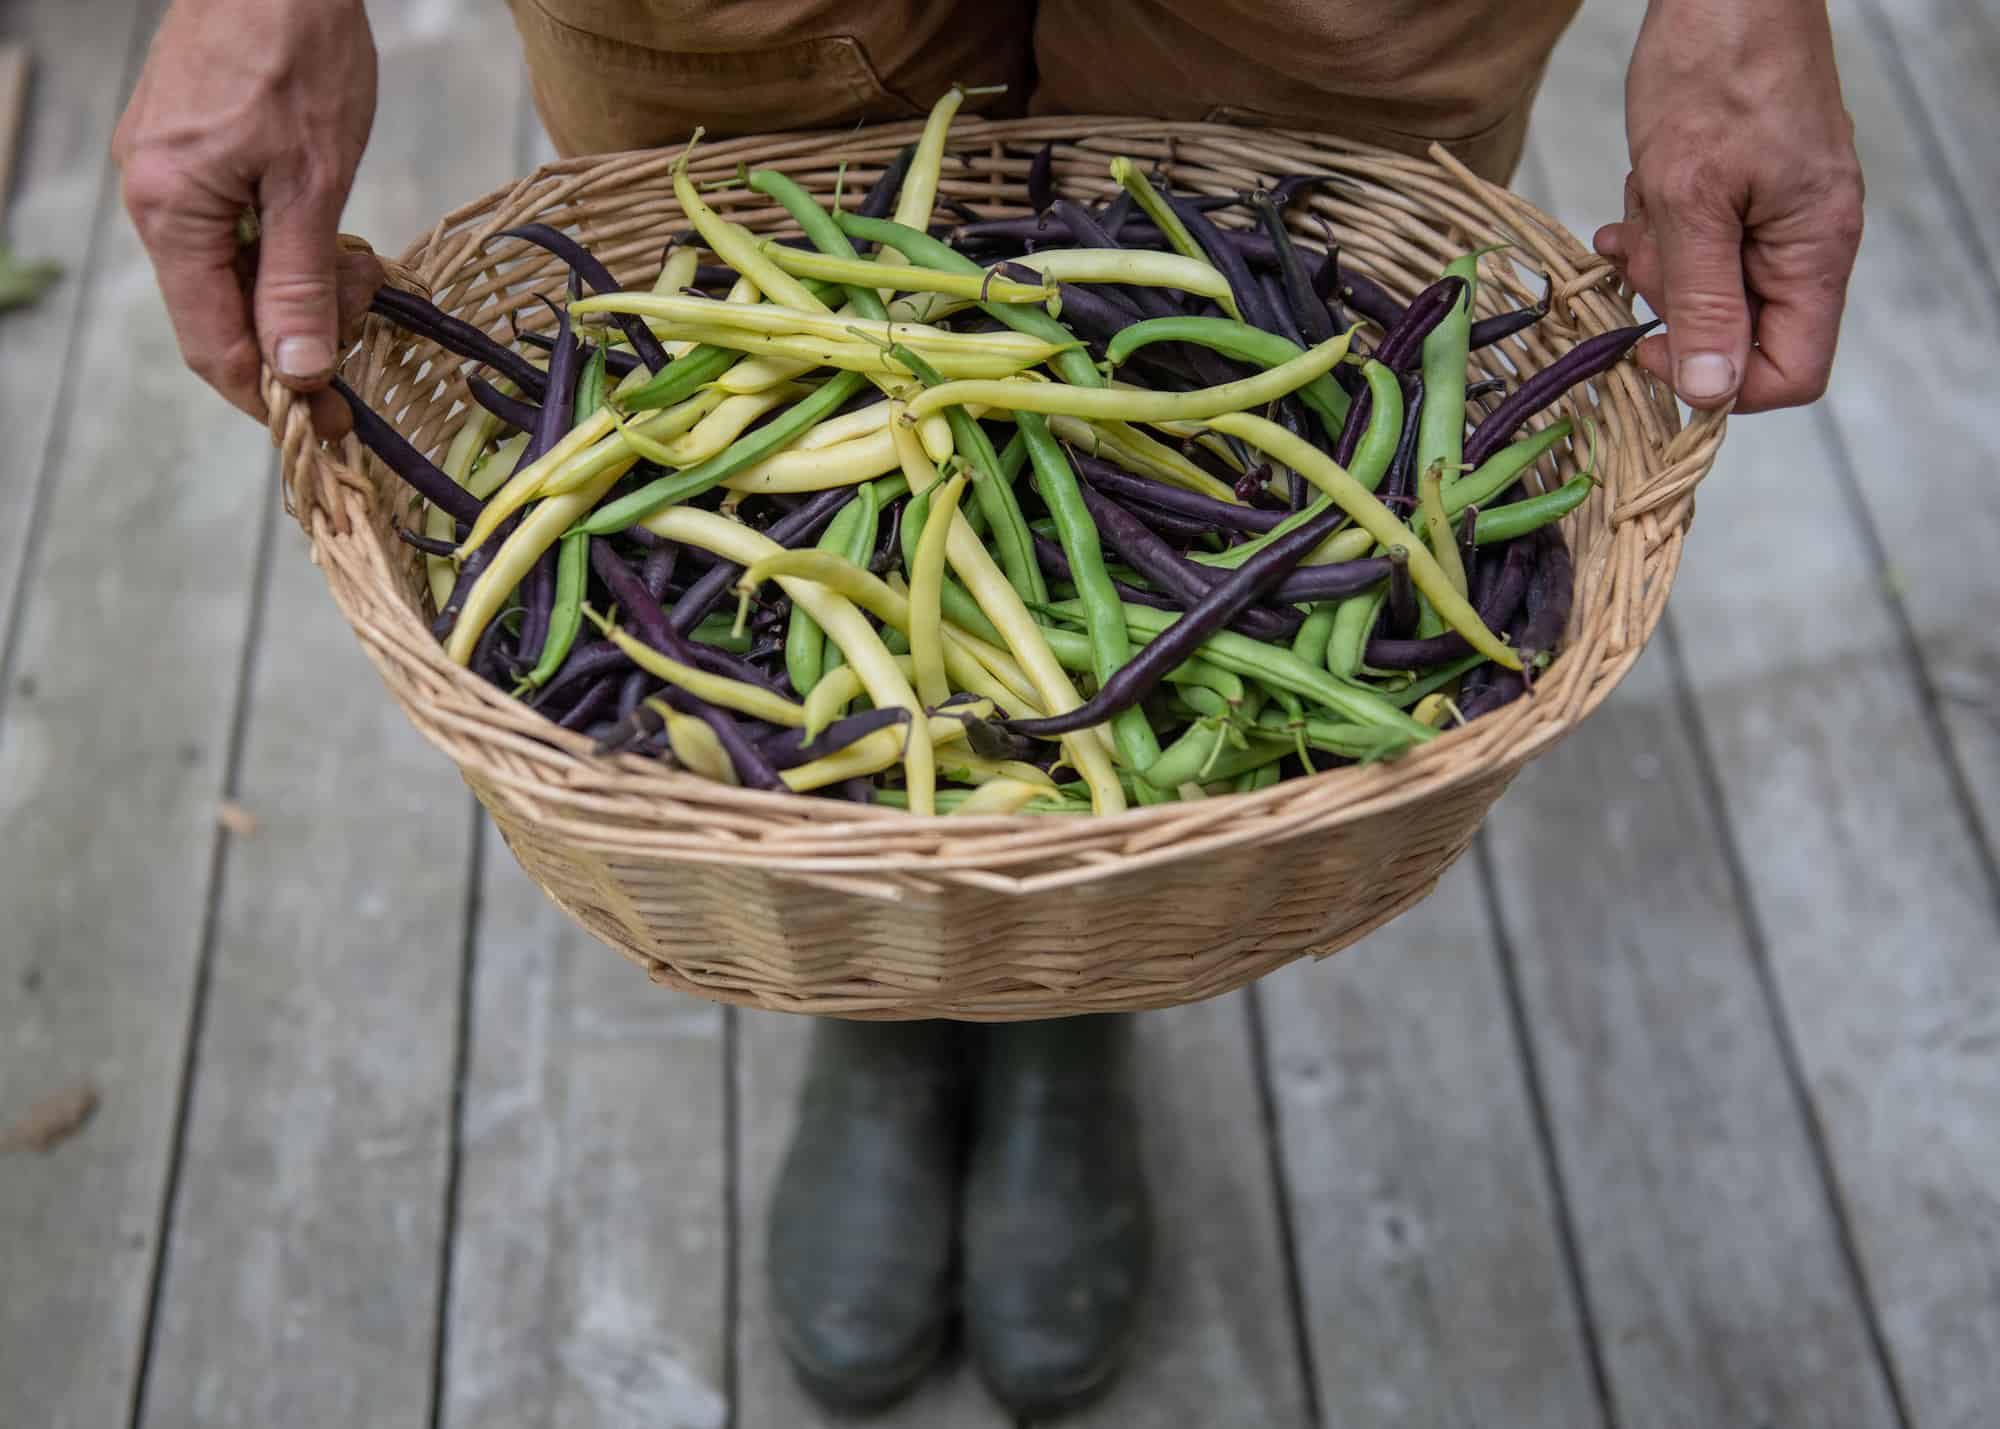 A wooden basket full of green beans in different colors of green, yellow, and purple.